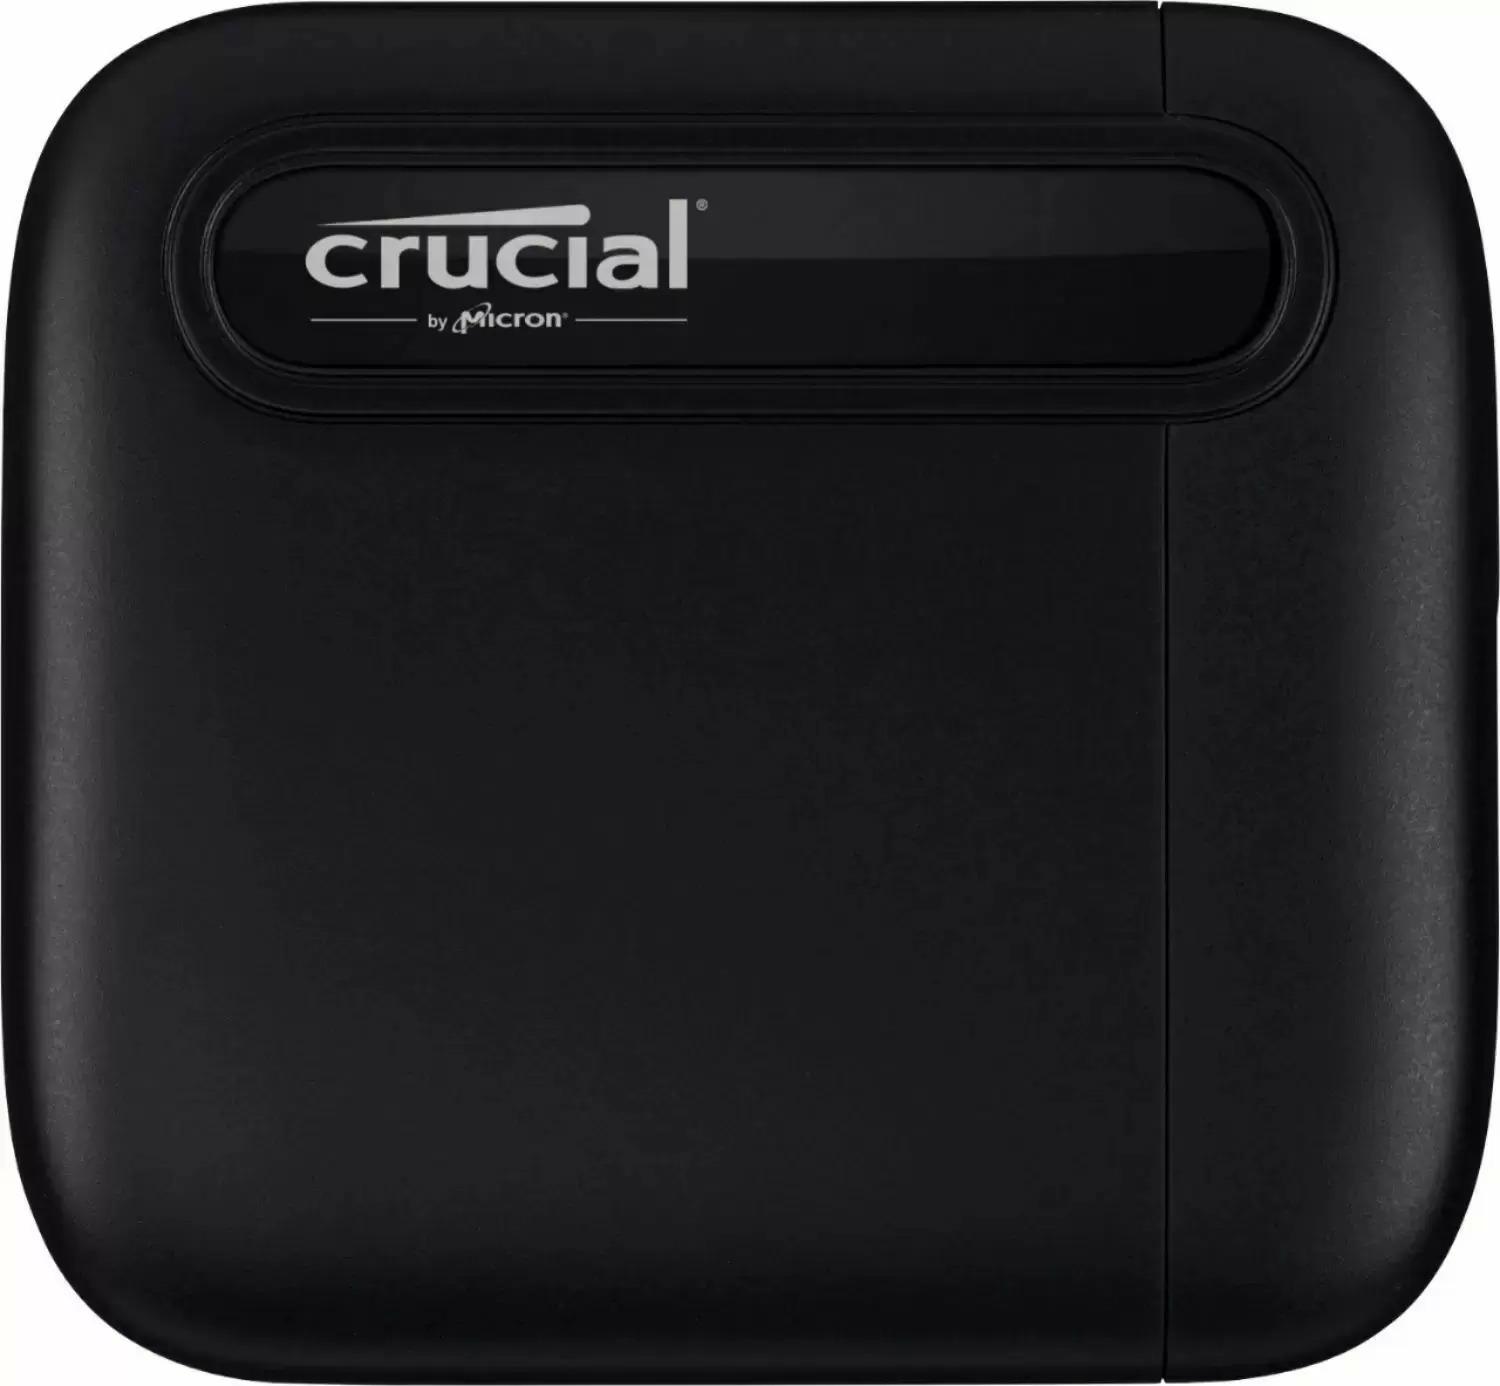 1TB Crucial X6 USB 3.2 Type-C External Solid State Drive SSD for $59.99 Shipped